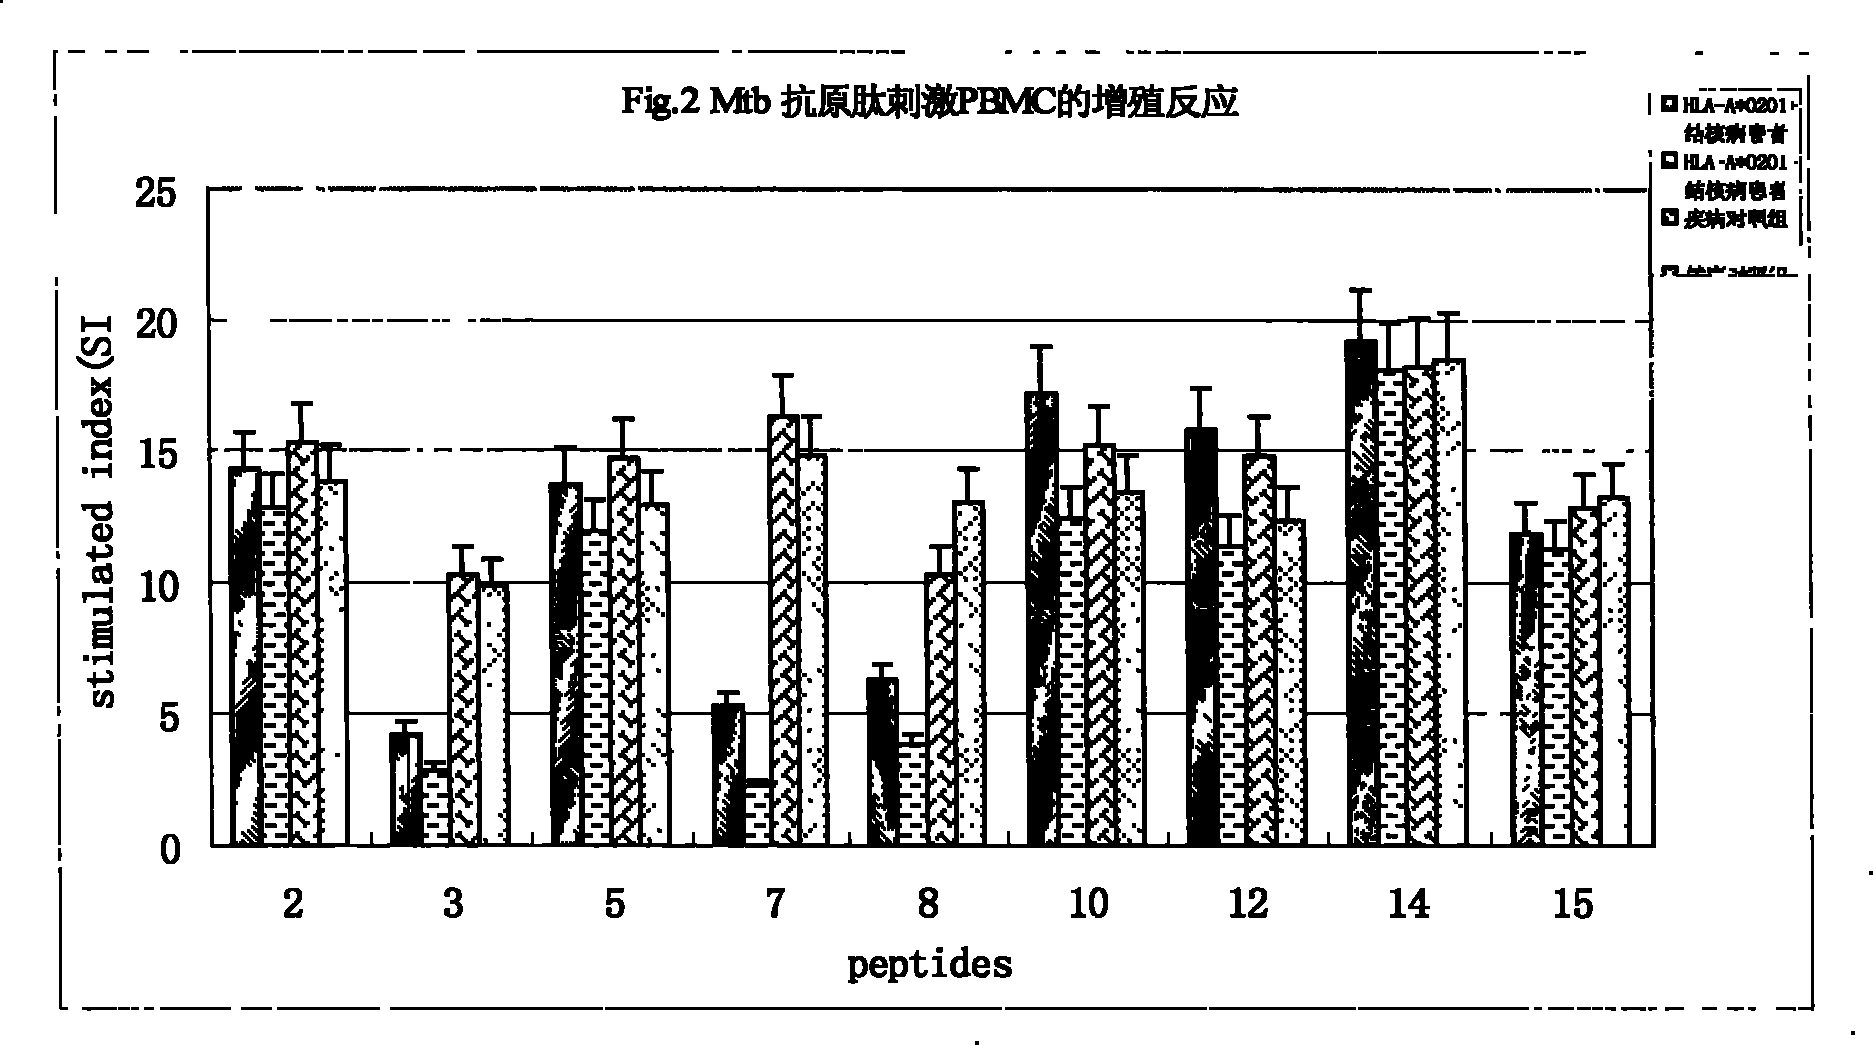 Antigen epitope for exciting protective immunity against tubercle bacillus of human body and uses thereof